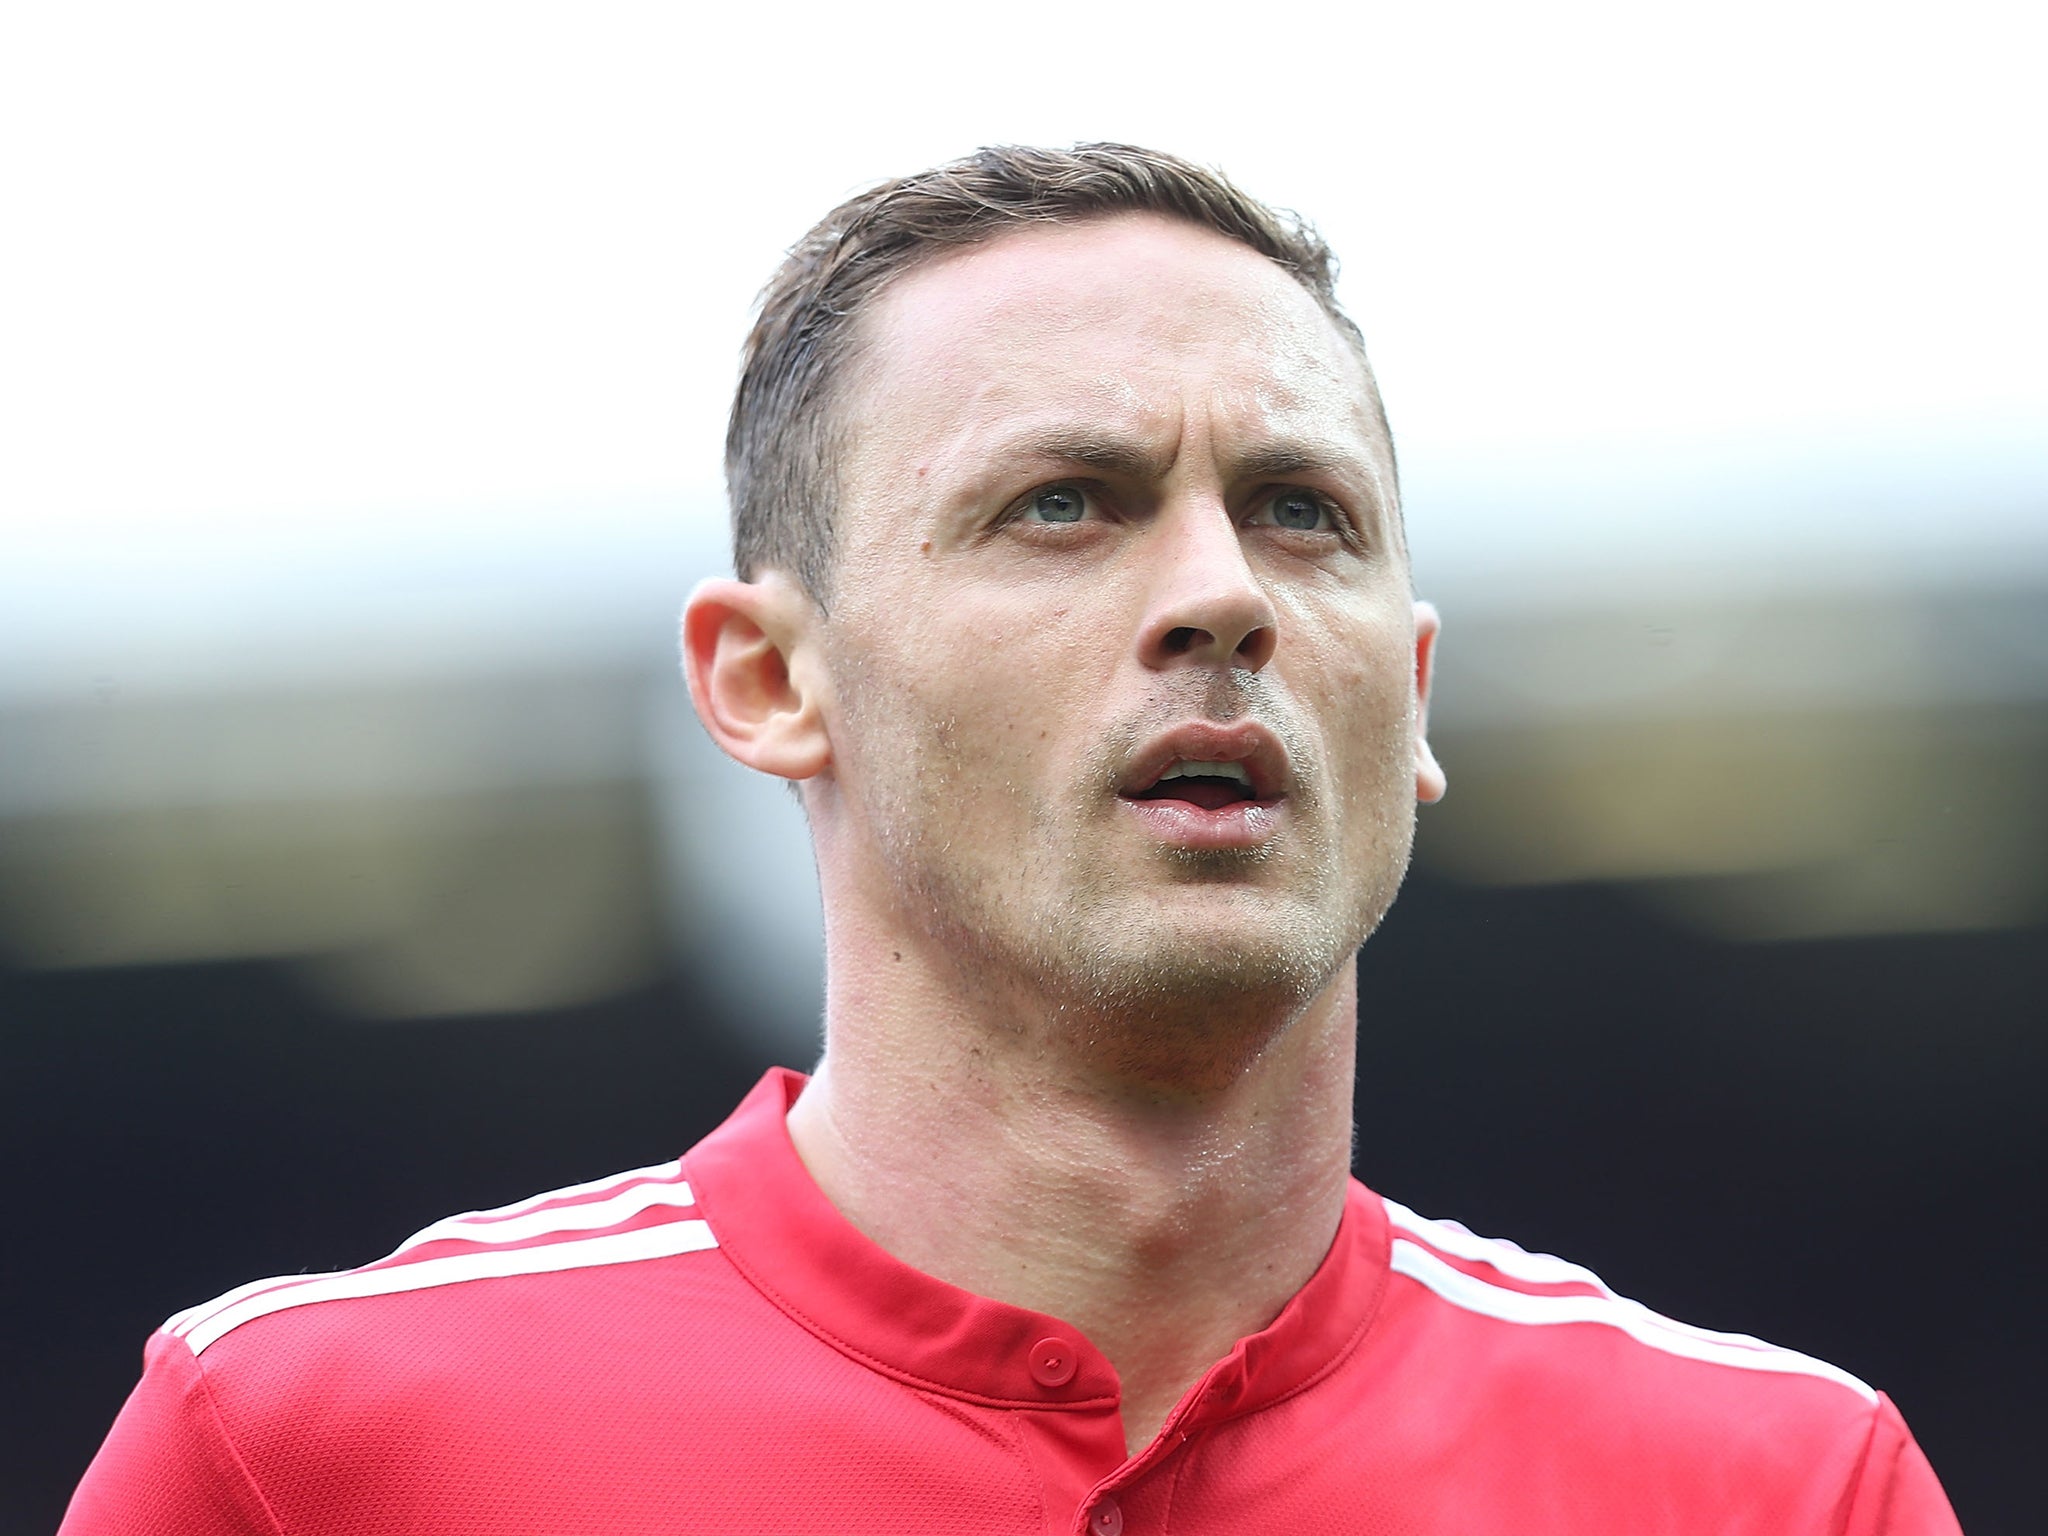 Nemanja Matic joined United for £40m this summer